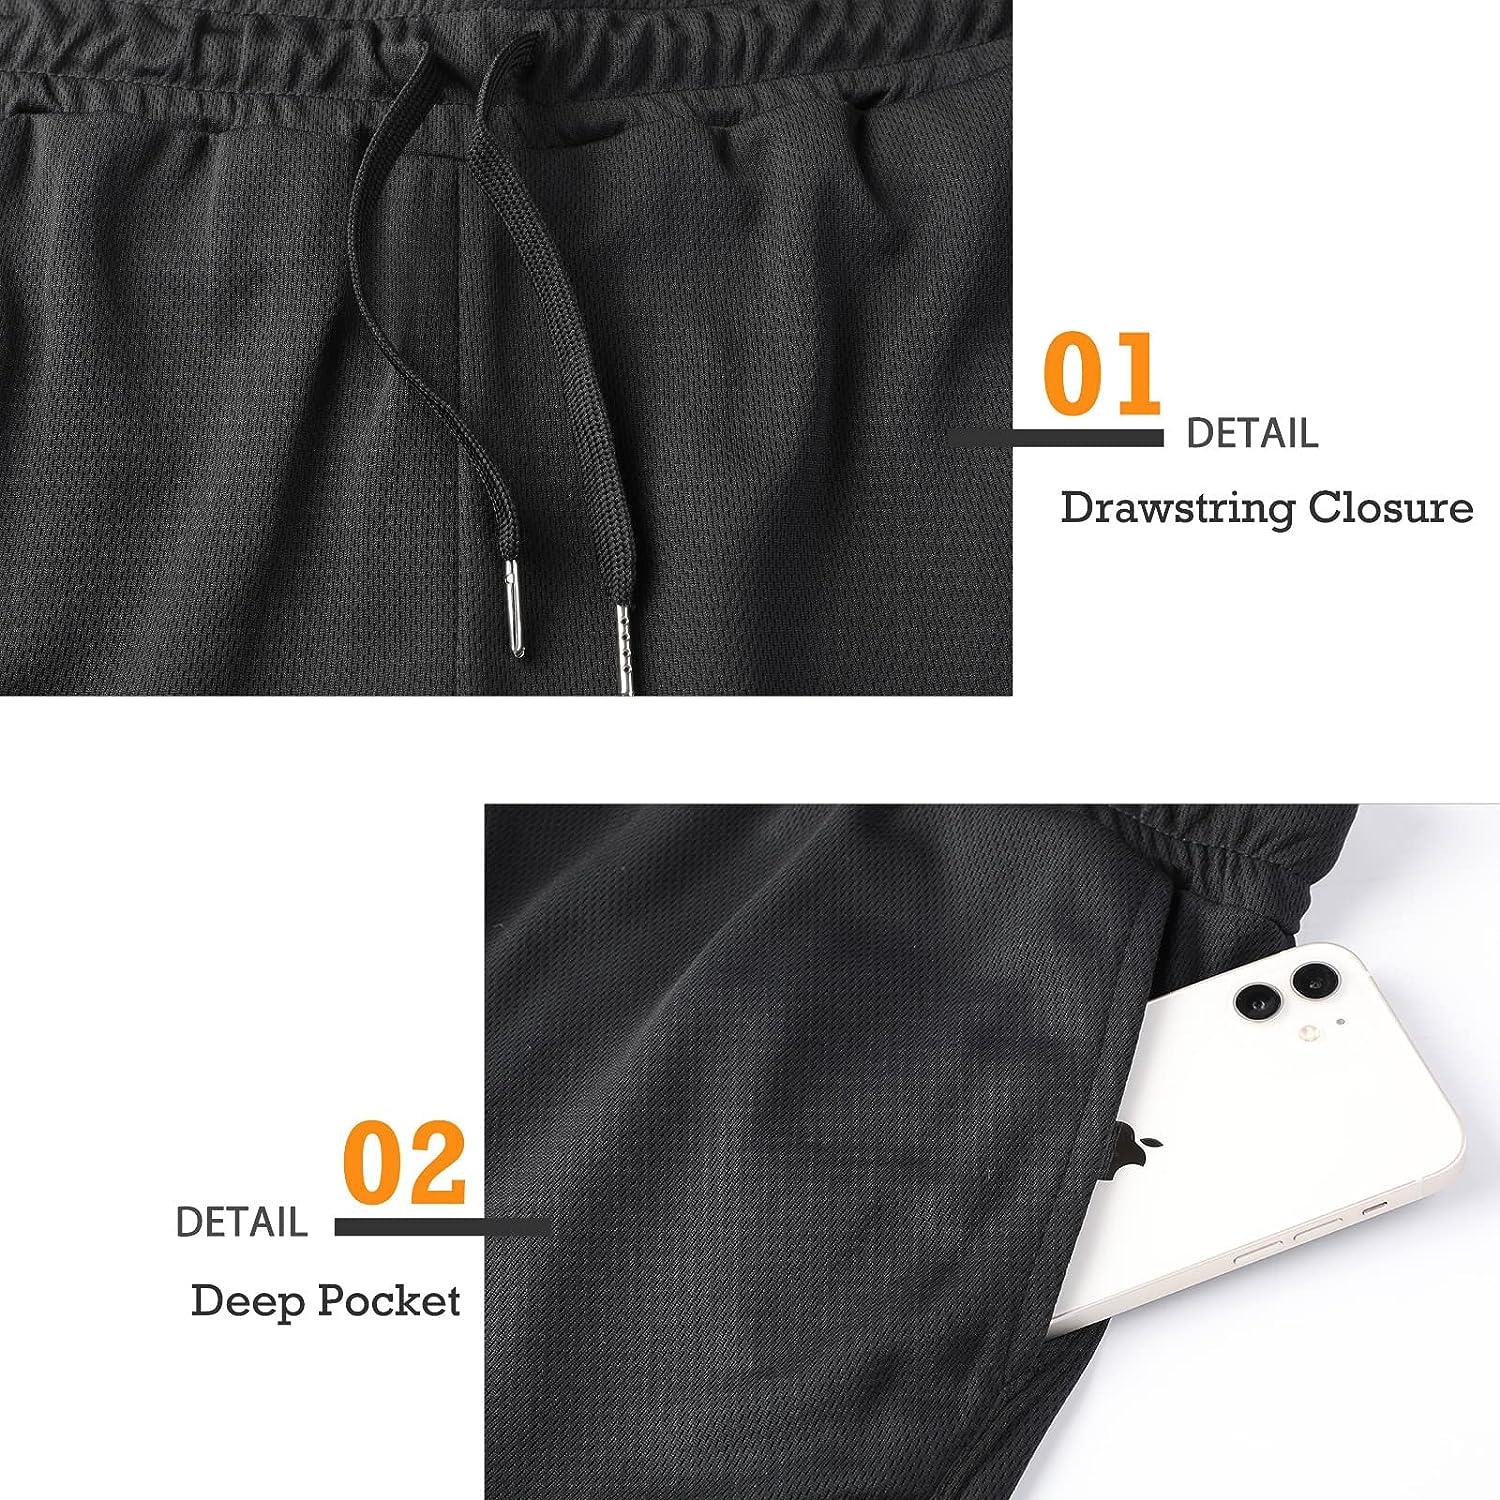  Surenow Mens Running Jogger Pants Workout Athletic